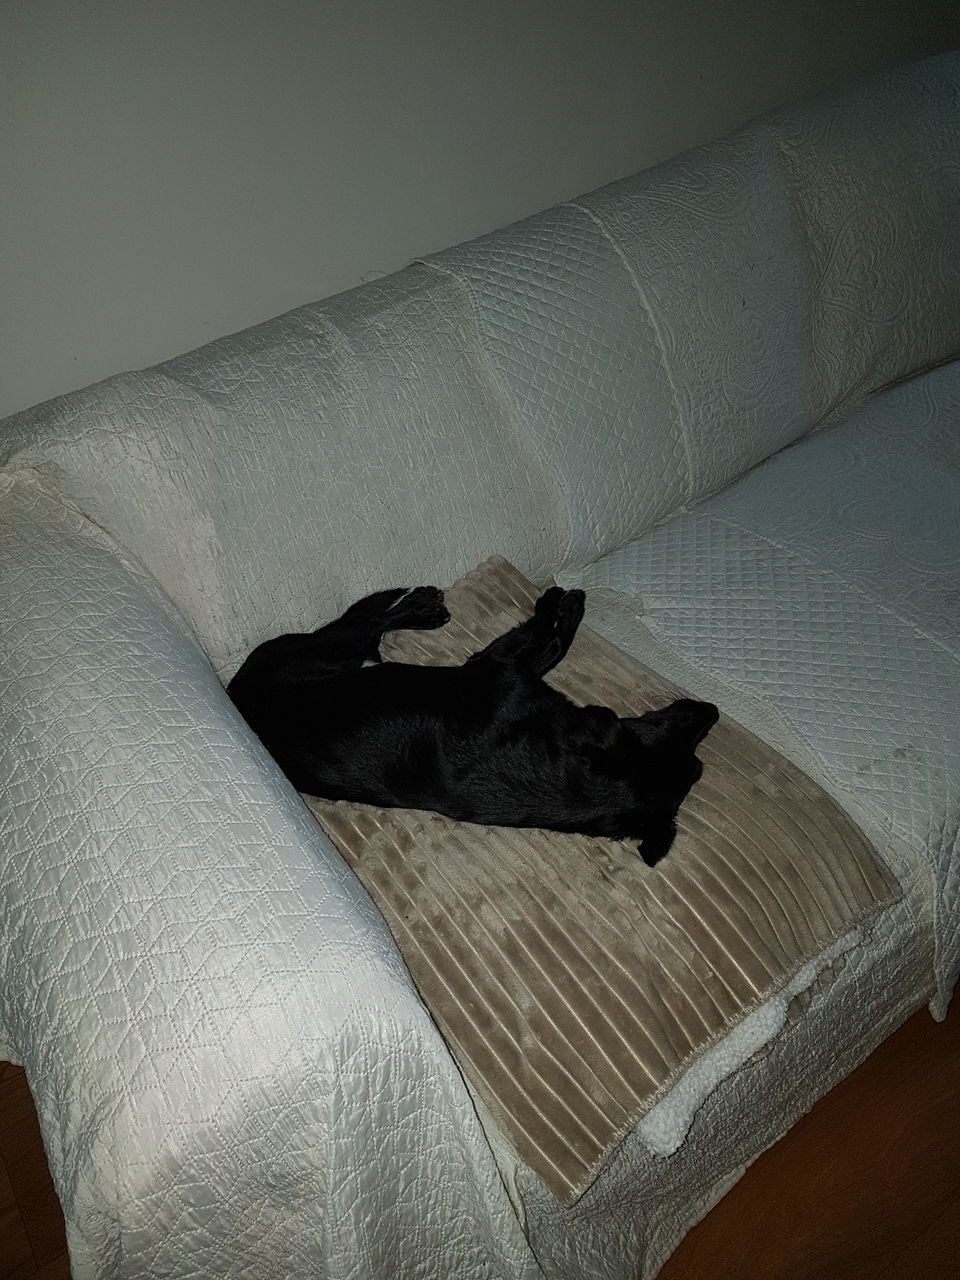 HIGH ANGLE VIEW OF BLACK DOG RESTING